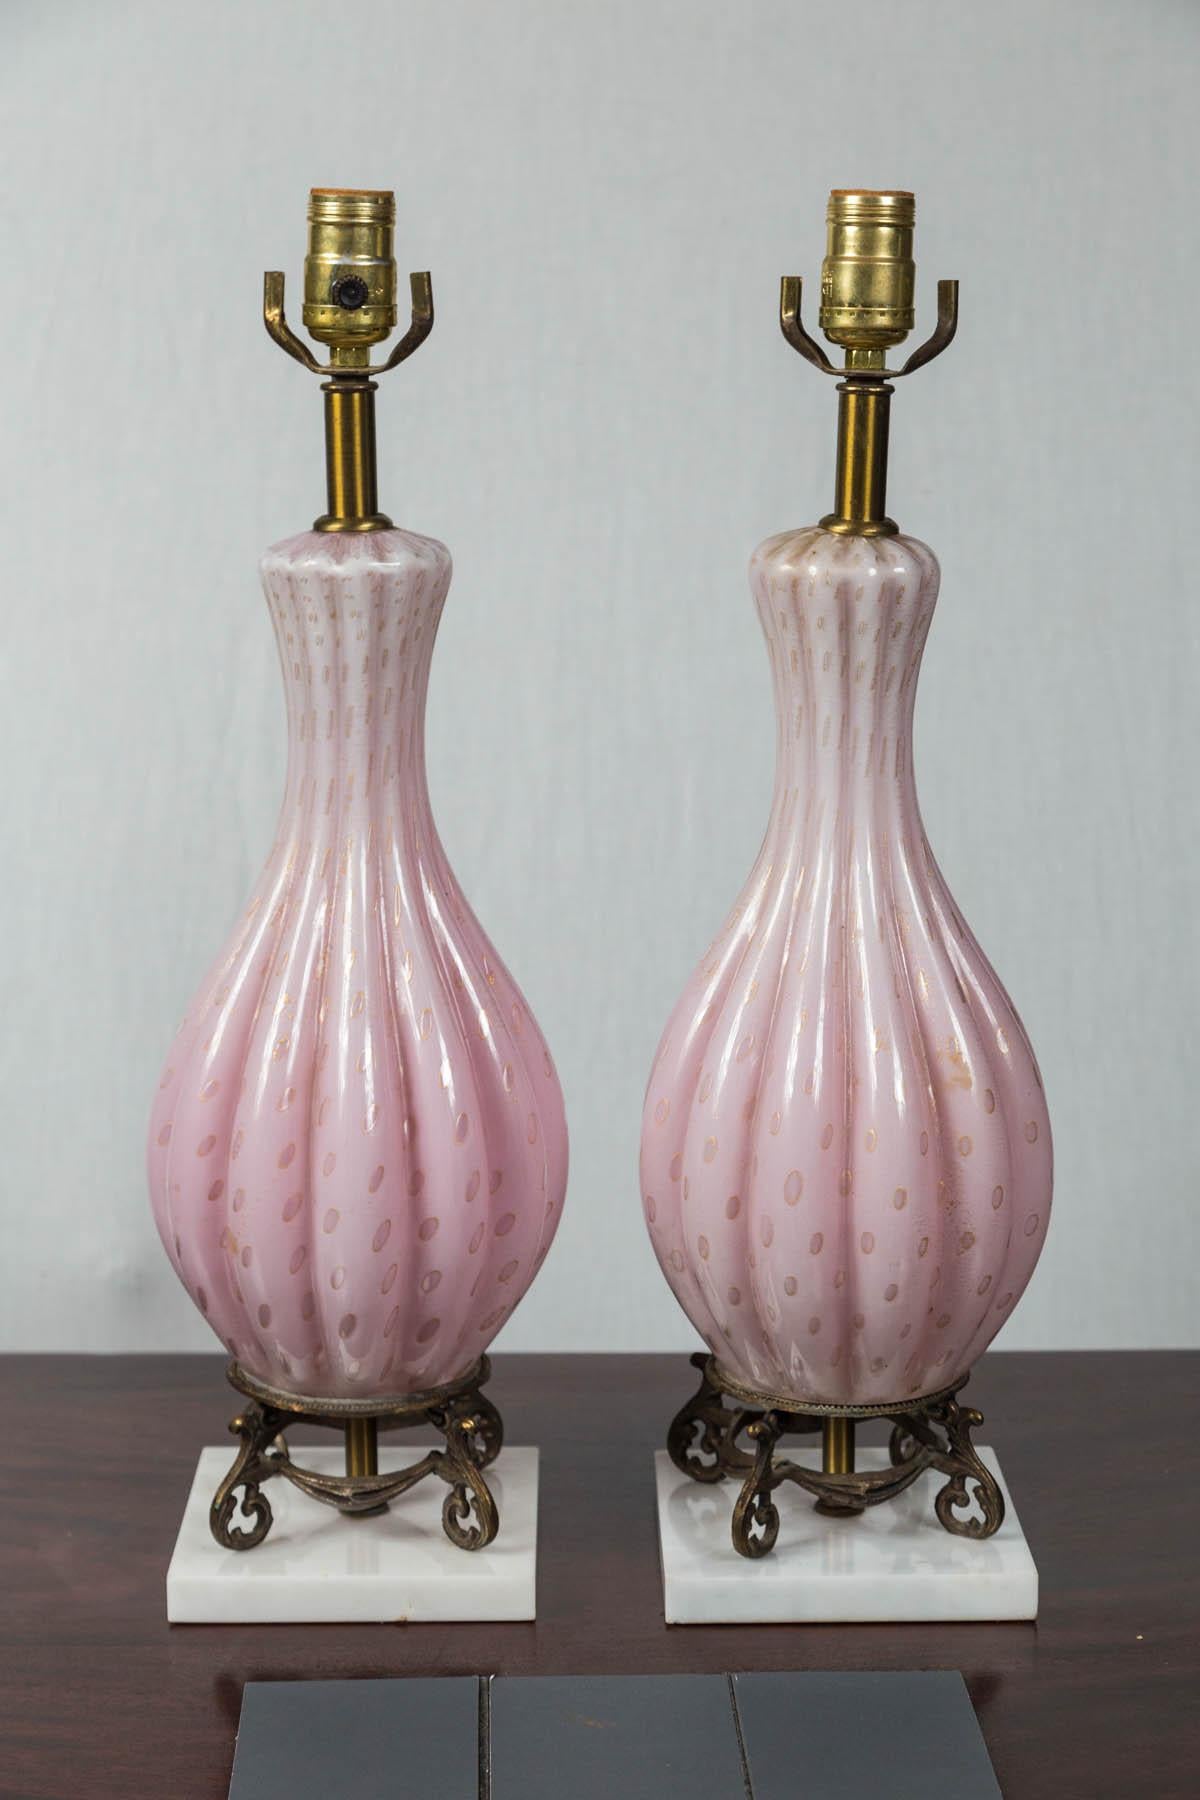 Pale pink glass with deeper pink cuts. Ribbed bulbous body. Raised on brass 4 legged base.
Glass with base measure 16 inches, not including lamp fittings
base measures 5.5 x 5.5.